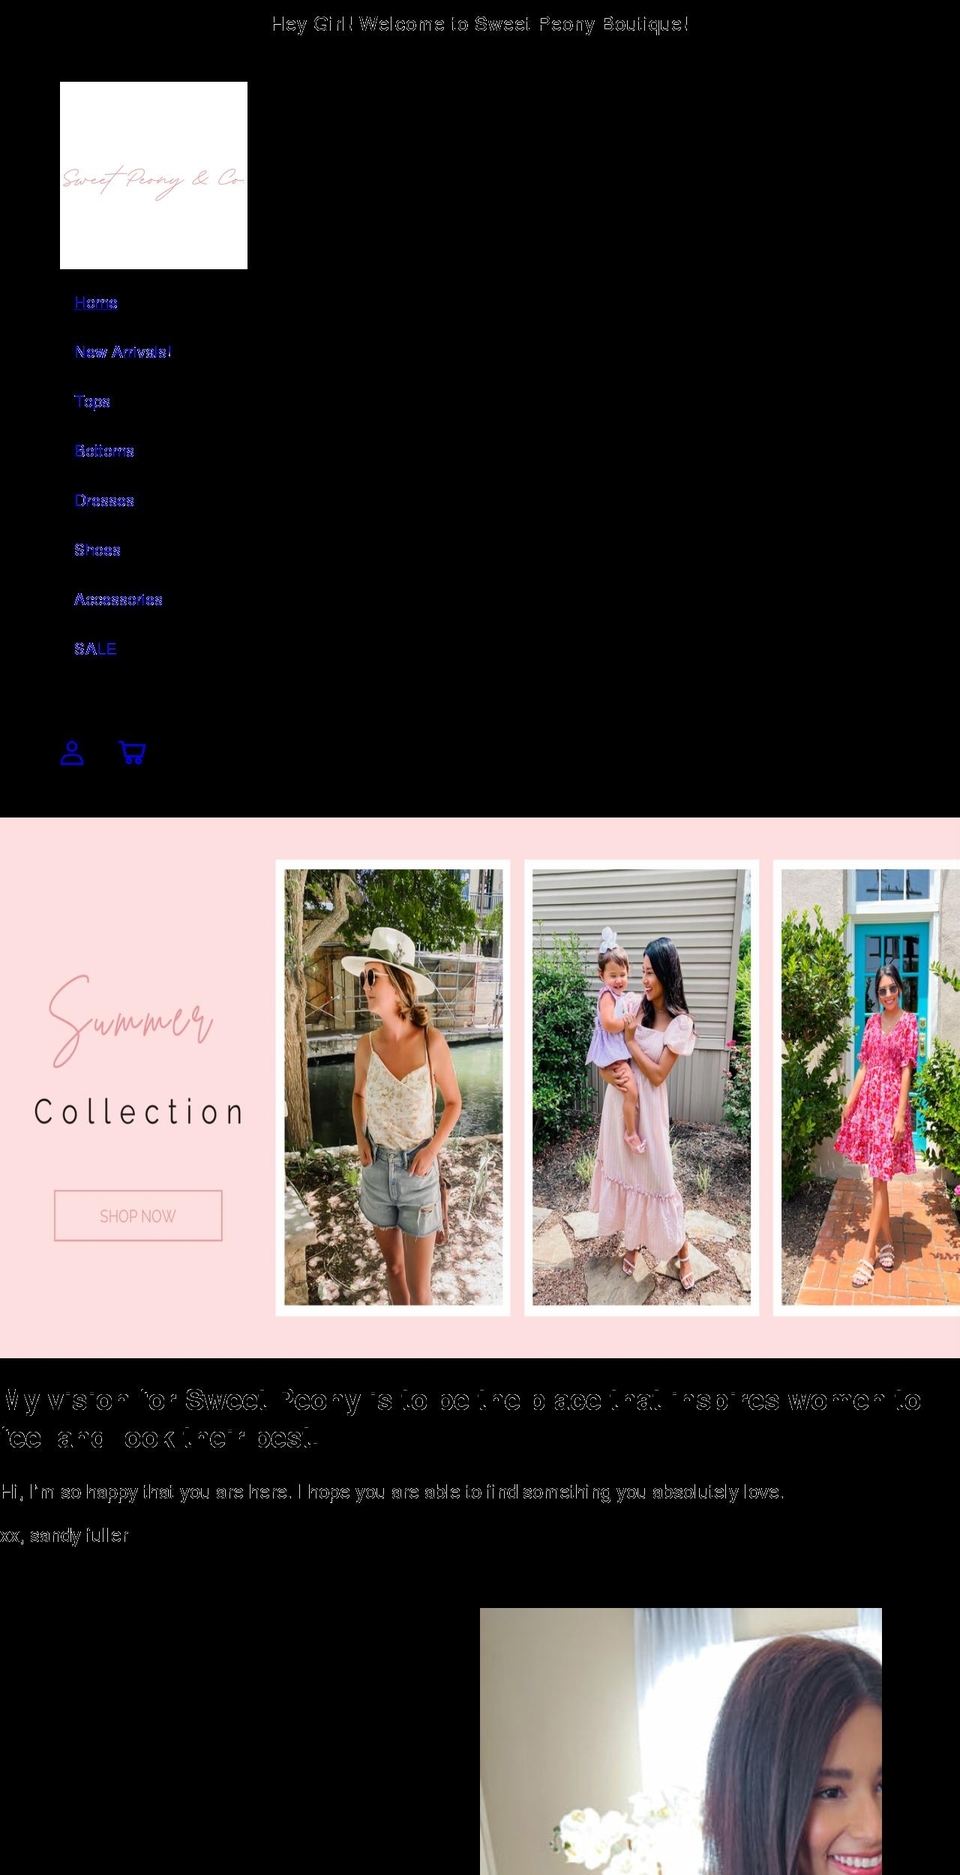 inspire Shopify theme site example sweetpeonyboutique.com